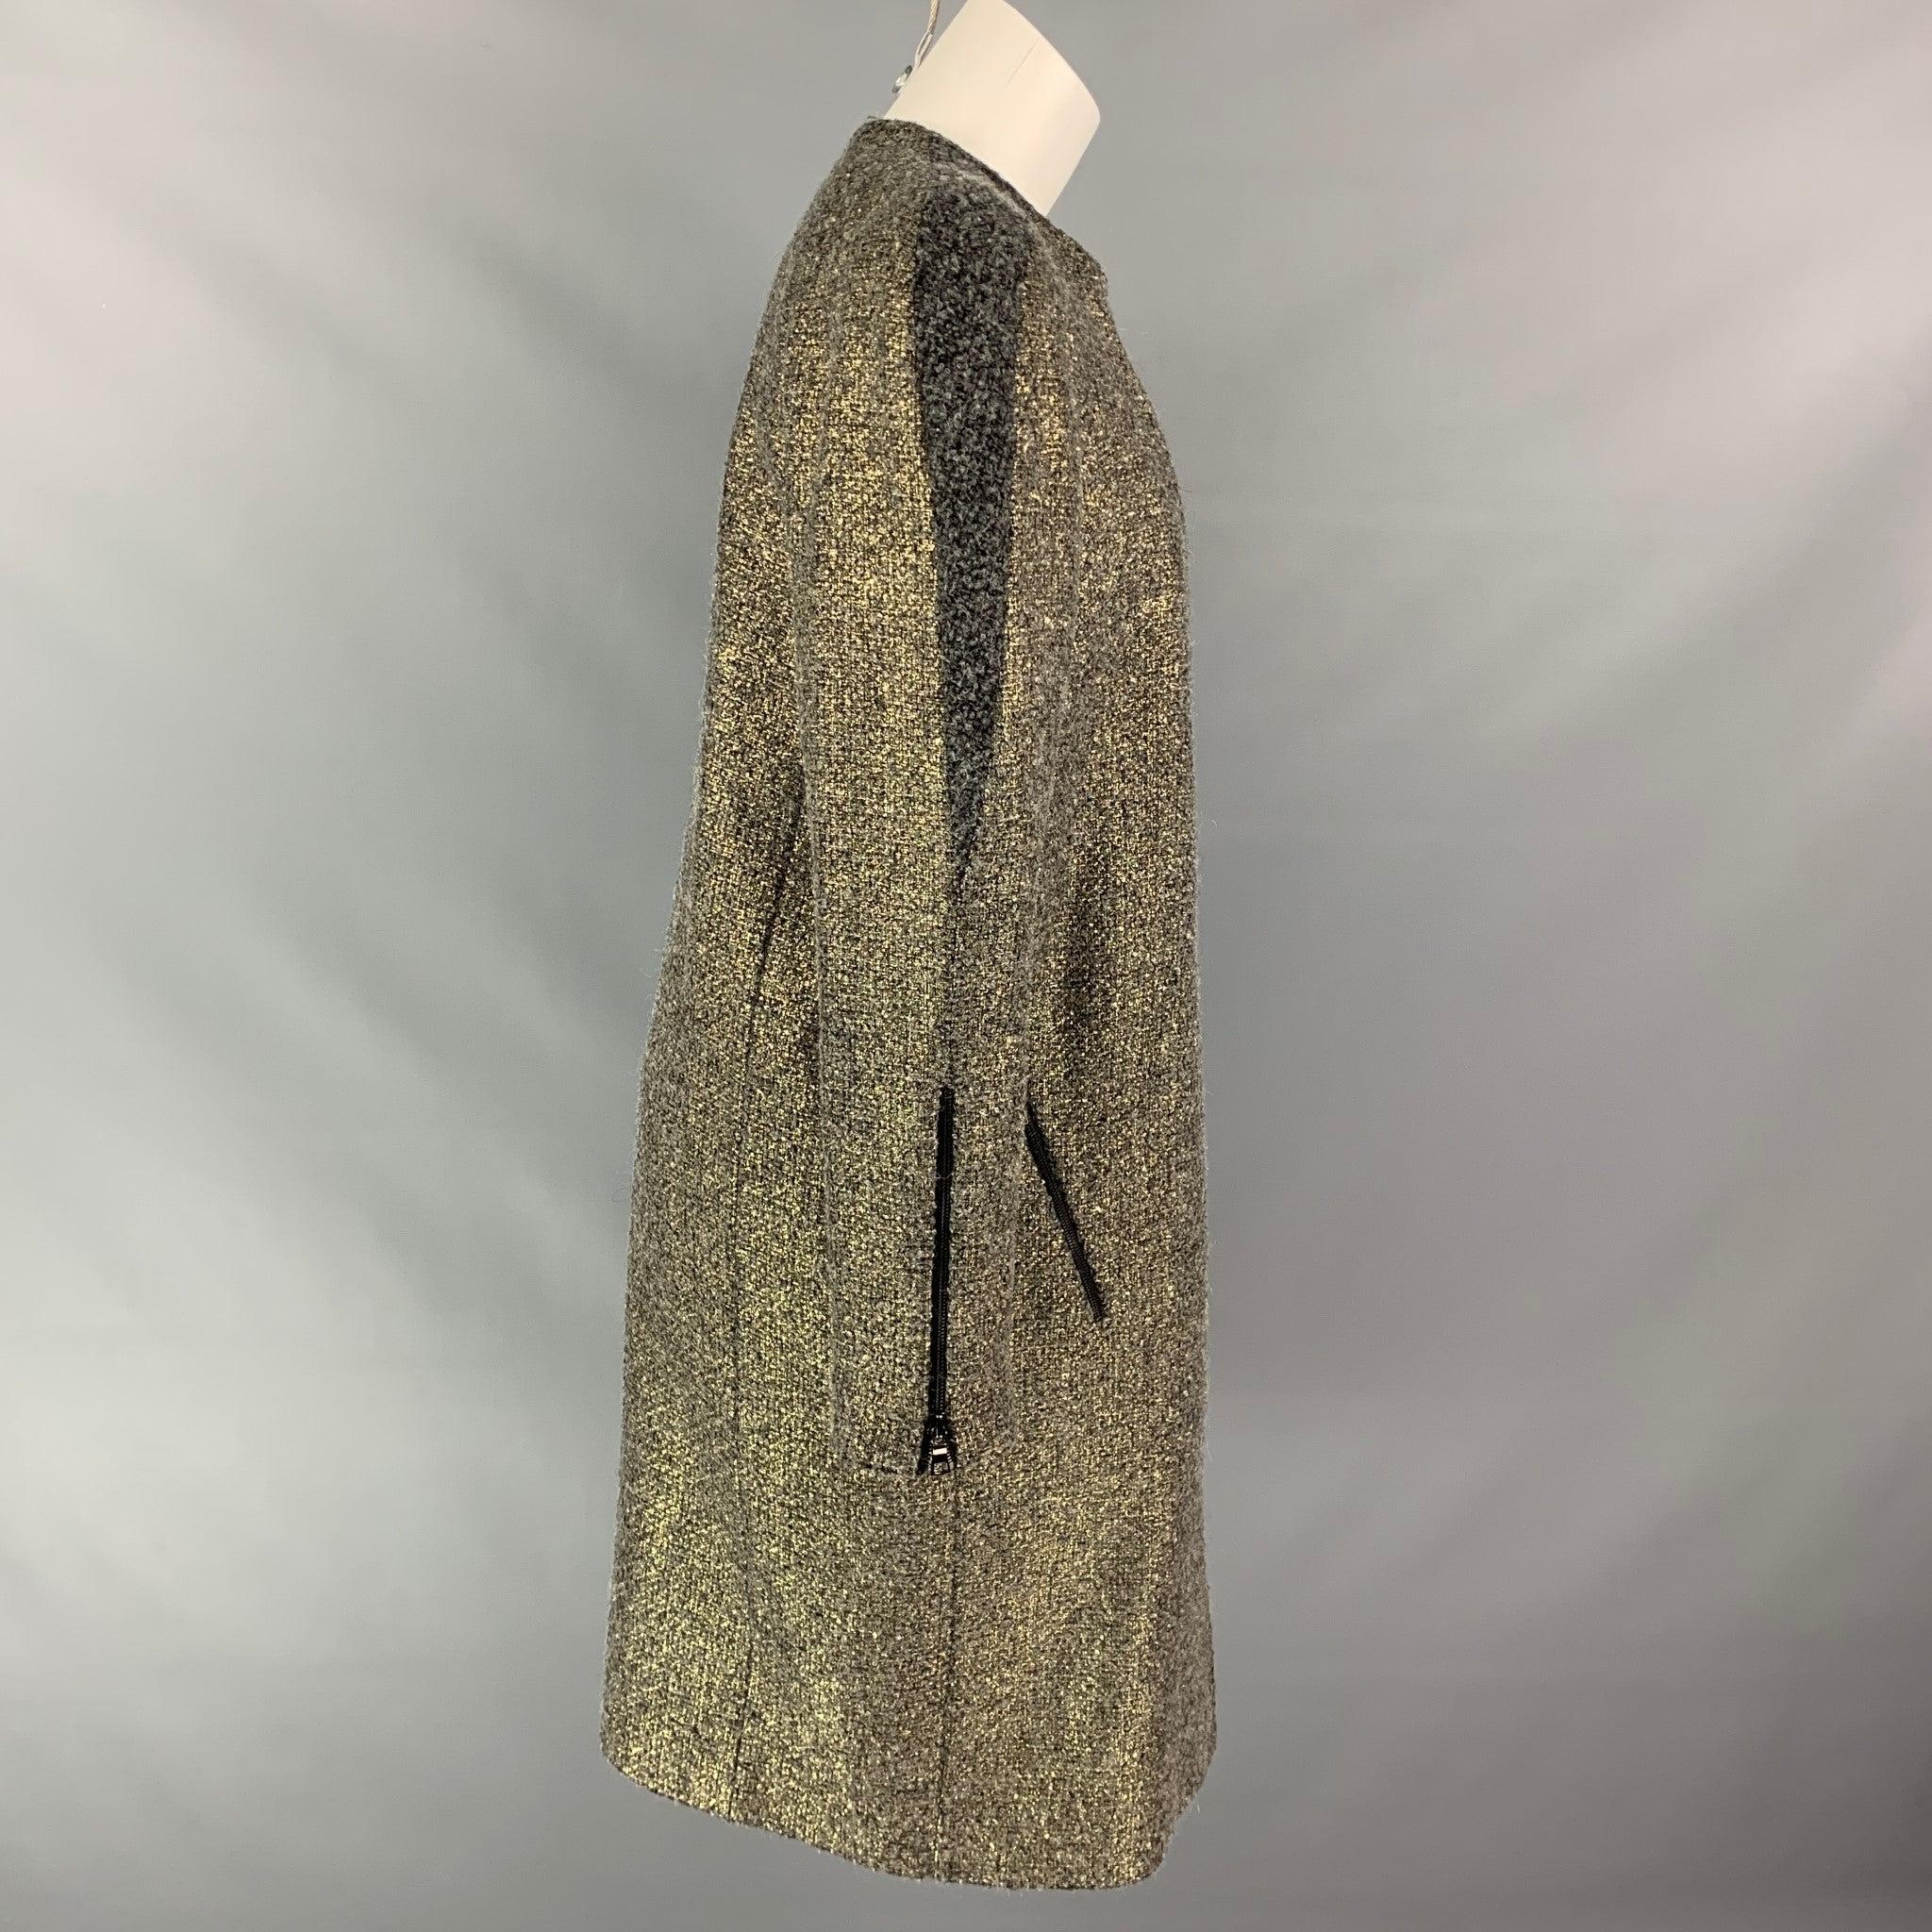 MONIQUE LHUILLIER Size 10 Grey & Gold Acrylic Blend Tweed Coat In Good Condition For Sale In San Francisco, CA